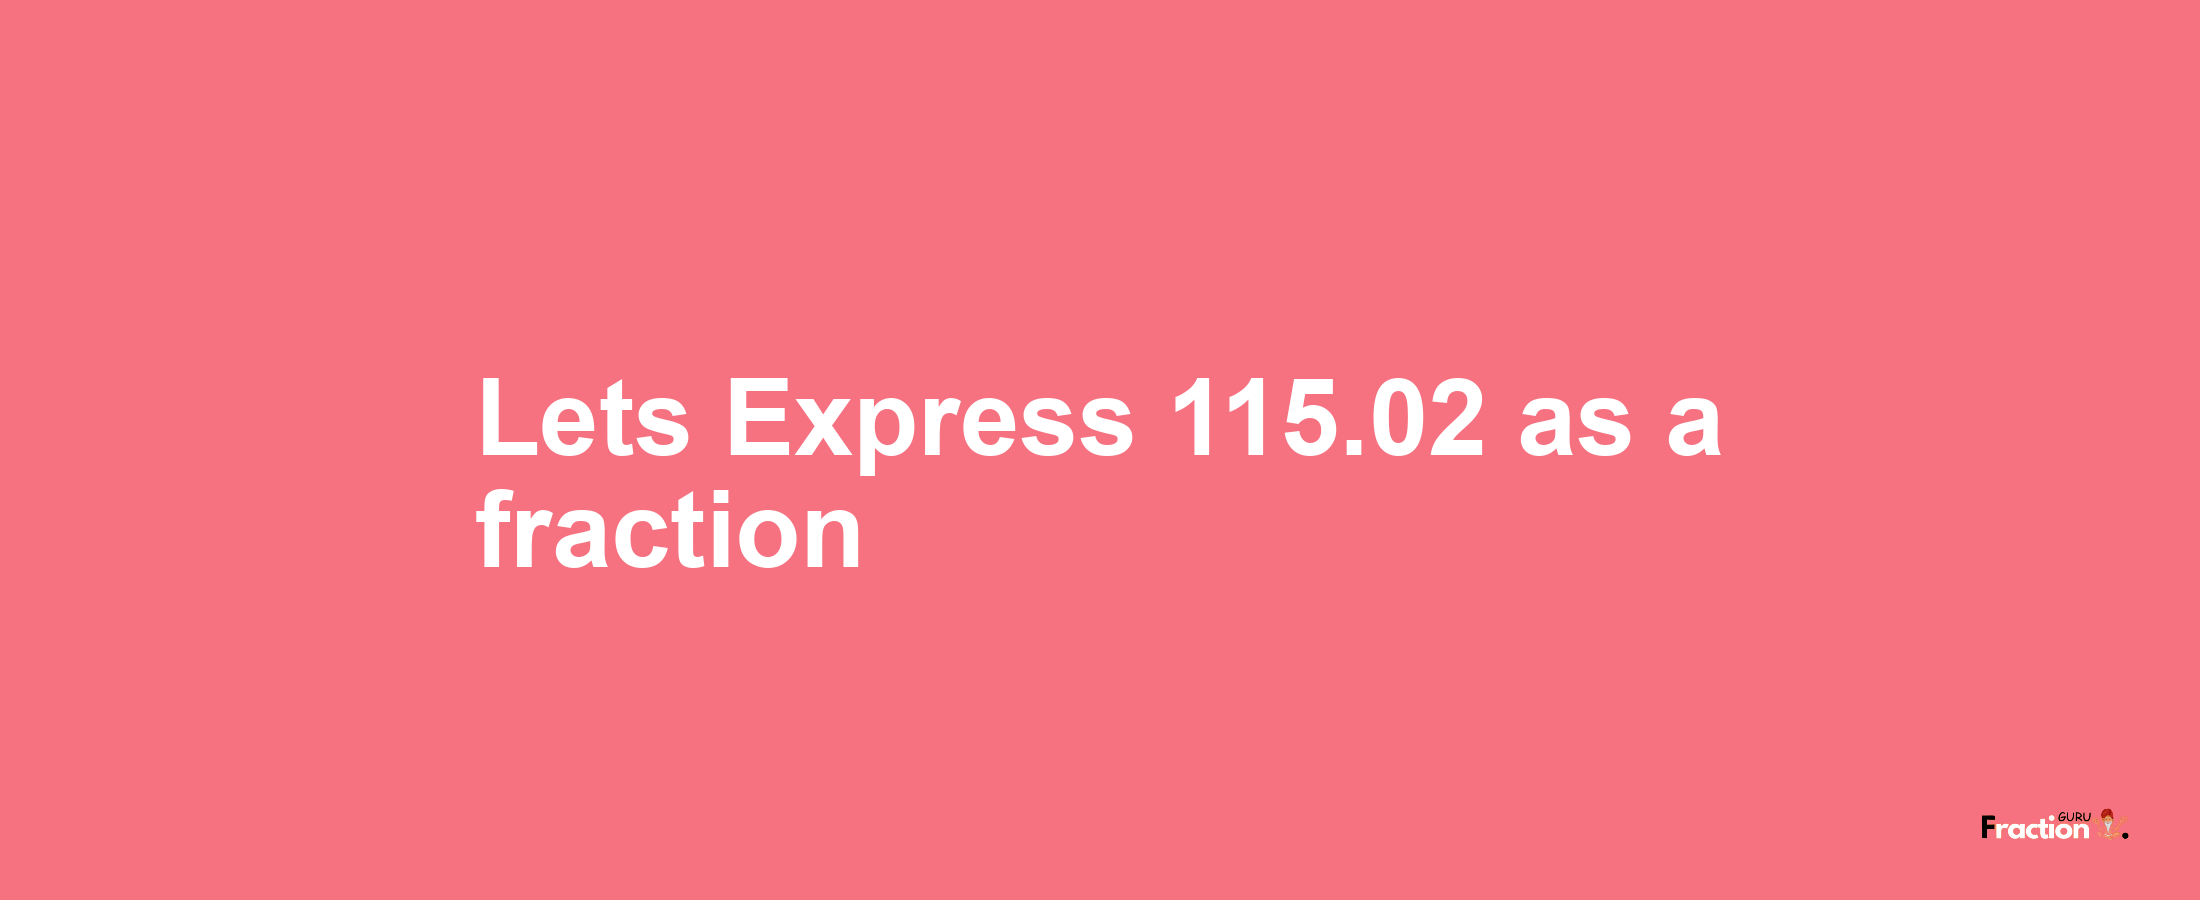 Lets Express 115.02 as afraction